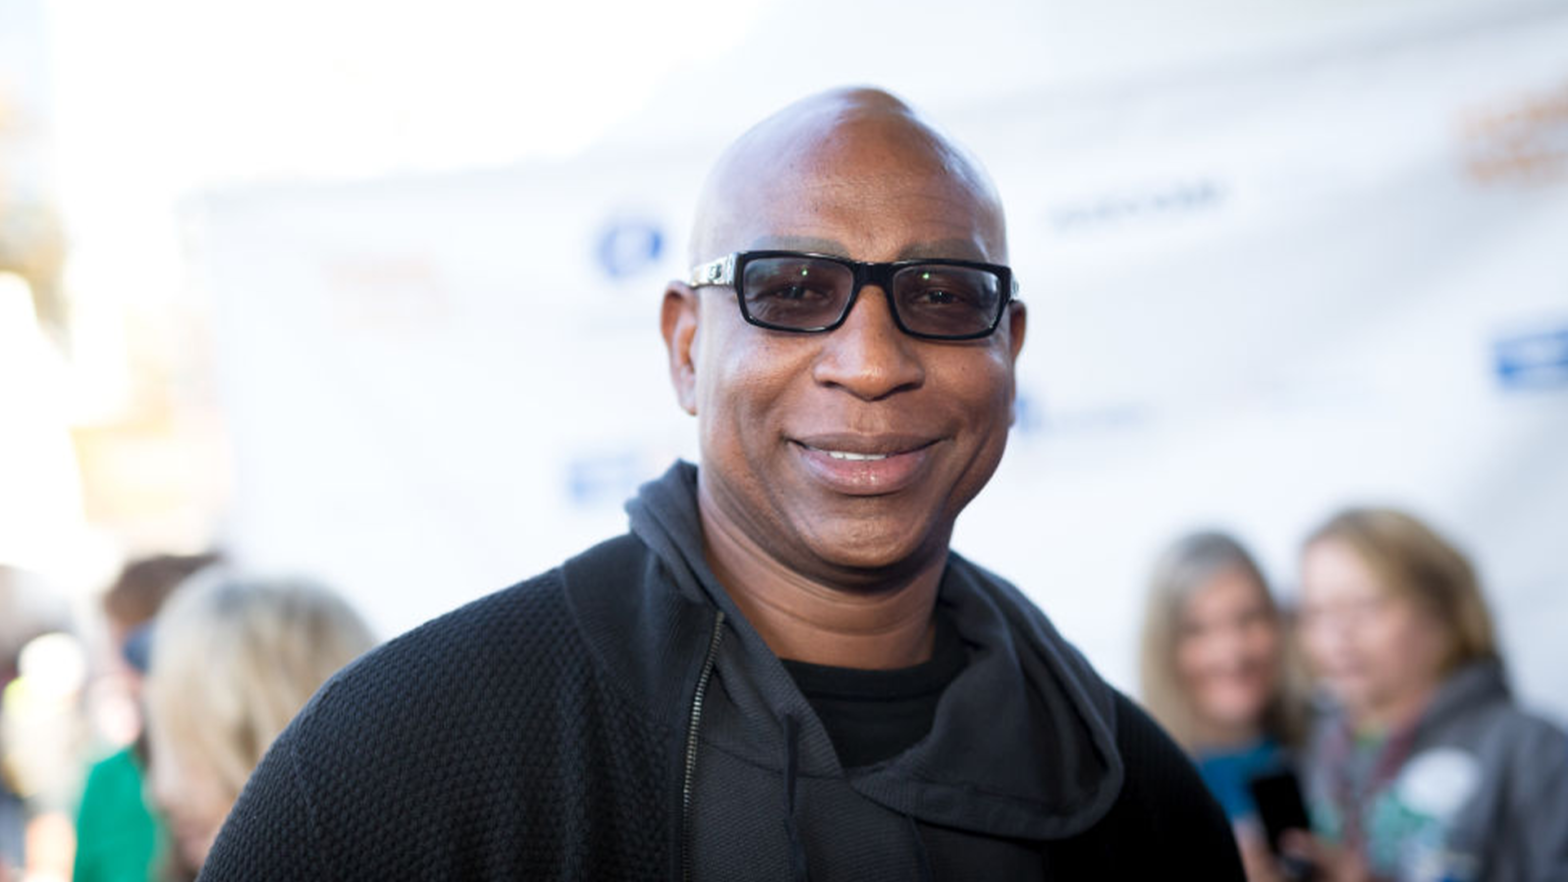 NFL Legend Eric Dickerson Has A $10M Net Worth — But He Once Almost Lost It All To A Fake Italian Count